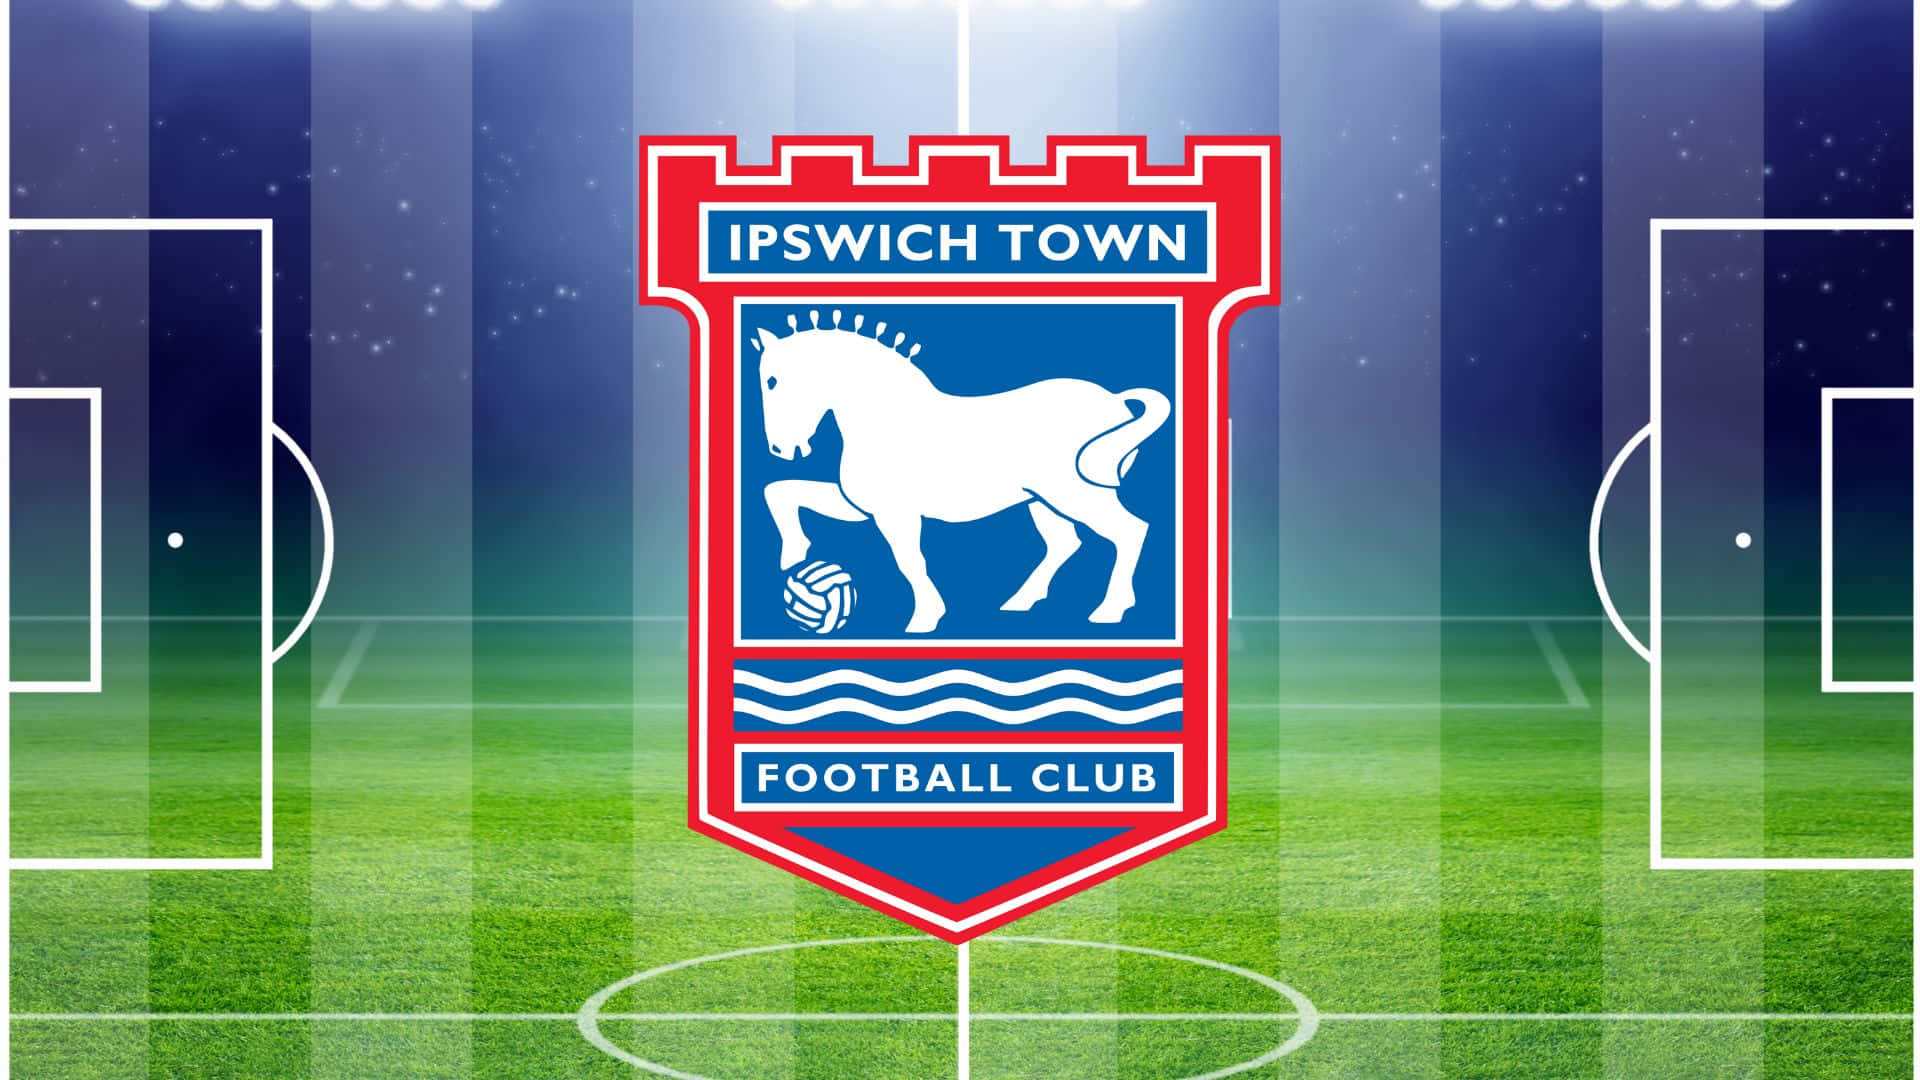 Download Ipswich Town Football Club Players Celebrating Wallpaper ...